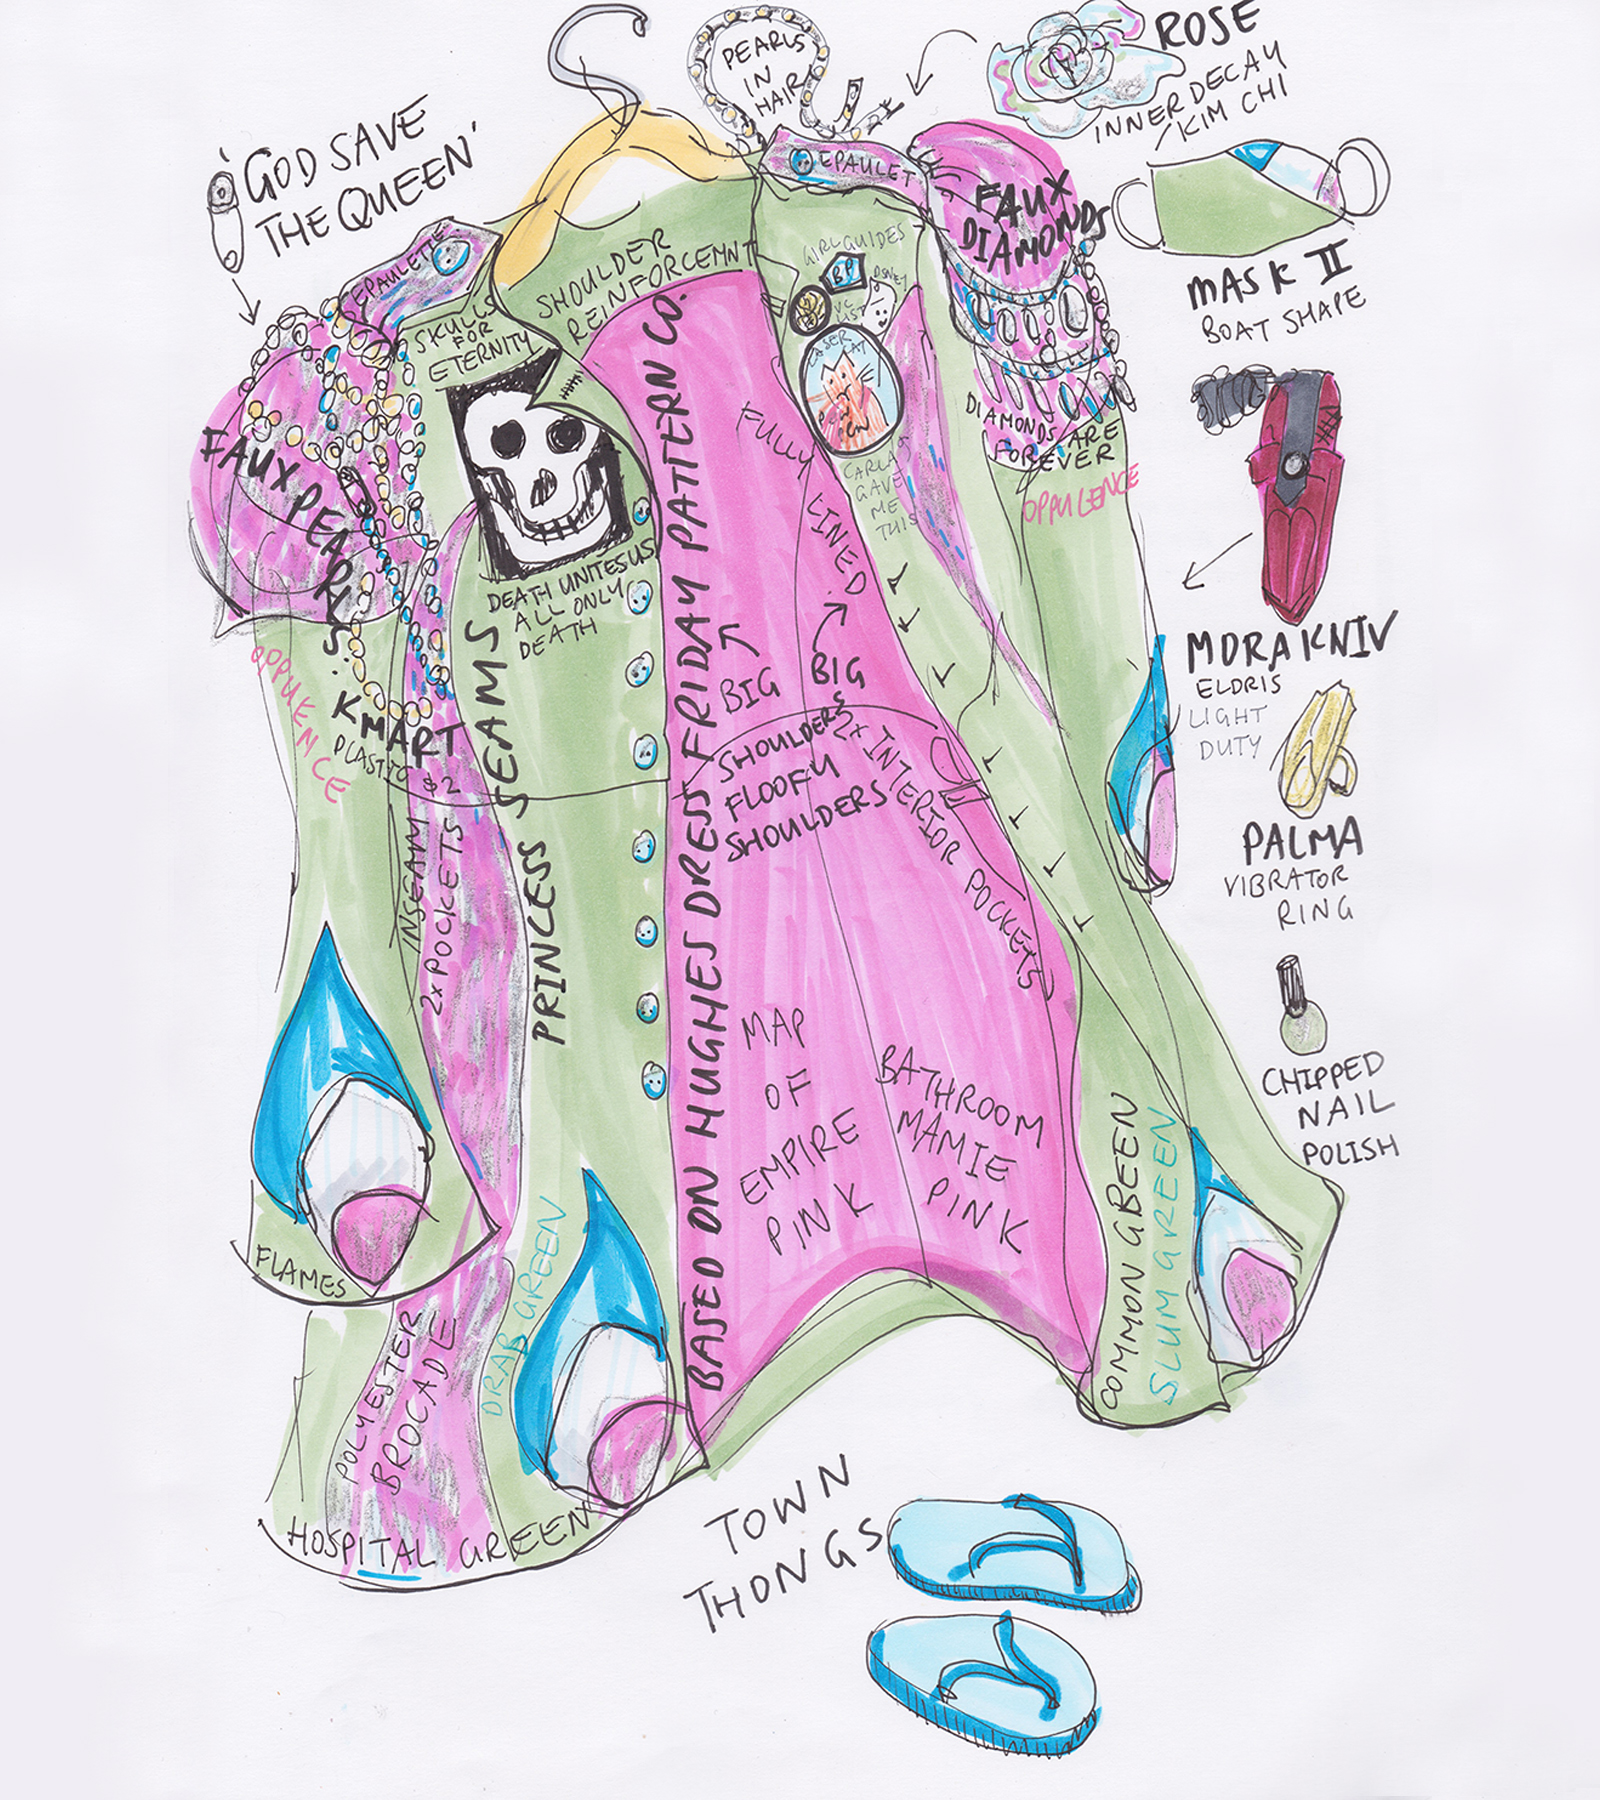 Drawing of a pink and mint green garment on a coat hanger with handwritten text describing various details of the clothing